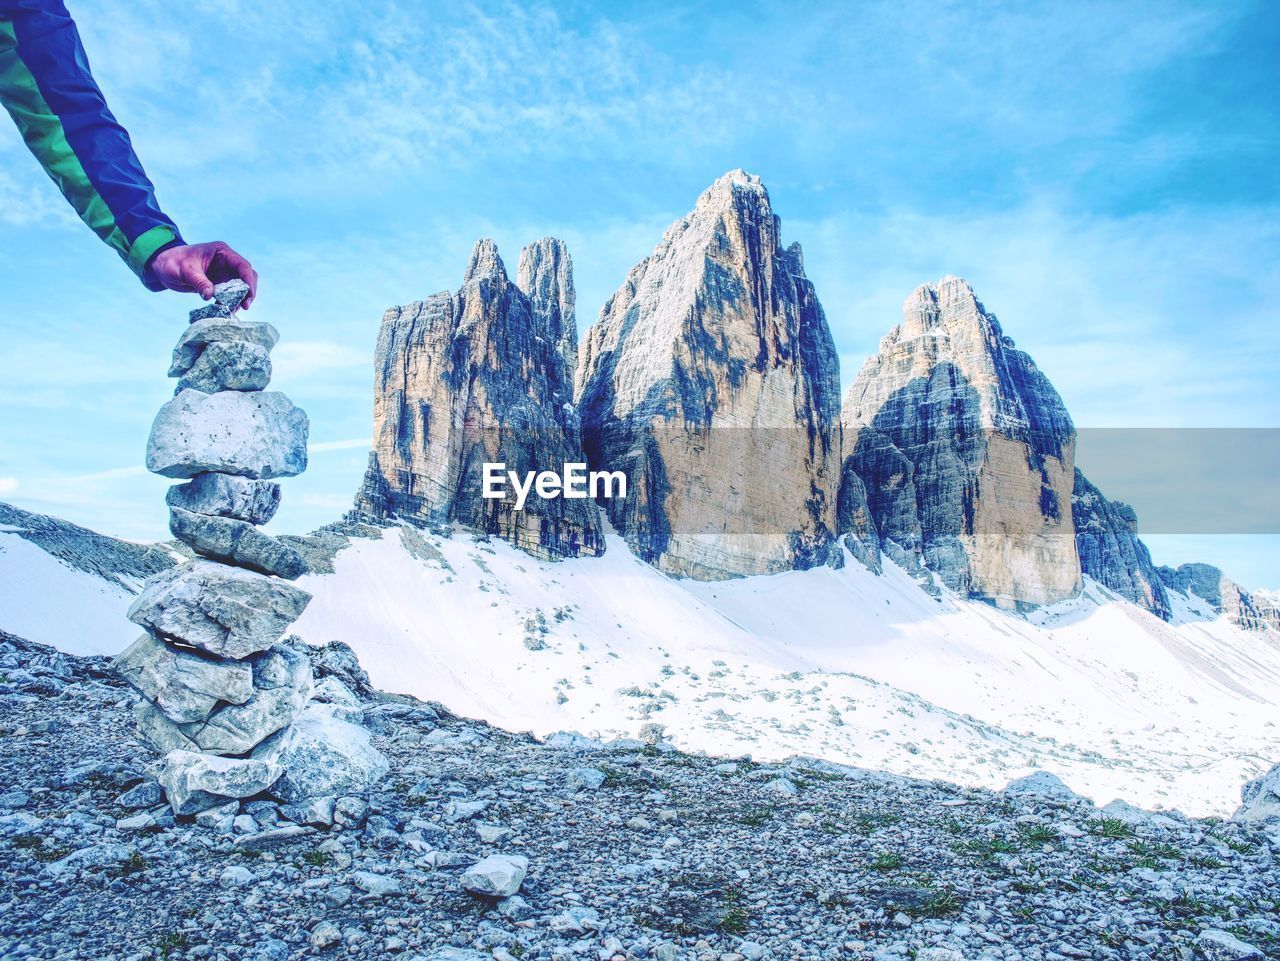 Alone hiker man at tre cime mountain massive building pyramid from pebbles. hand hold the last stone